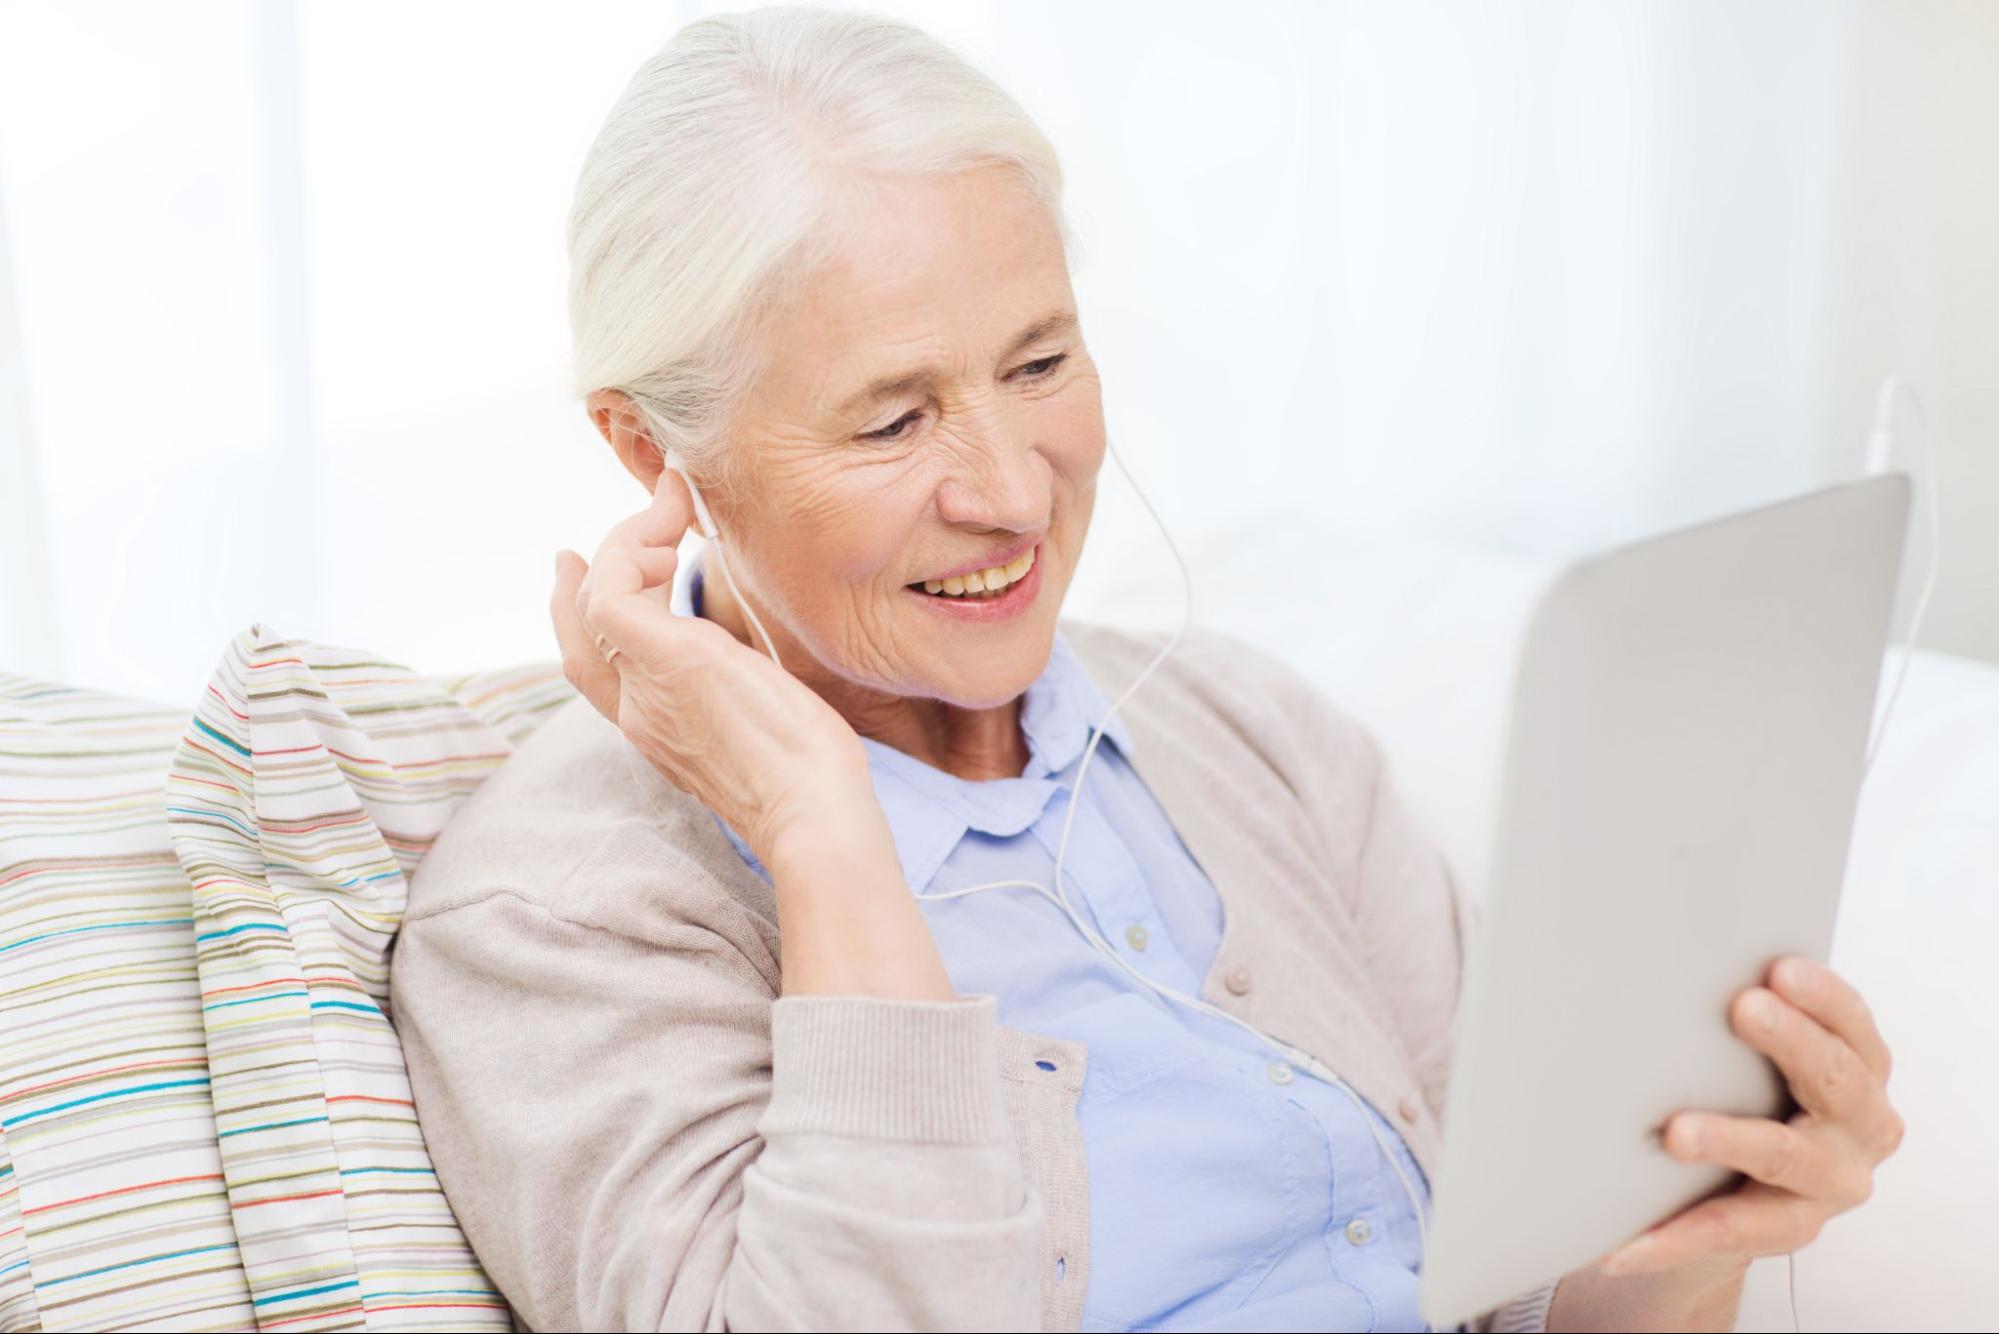 hearing test app: old woman watching in a tablet